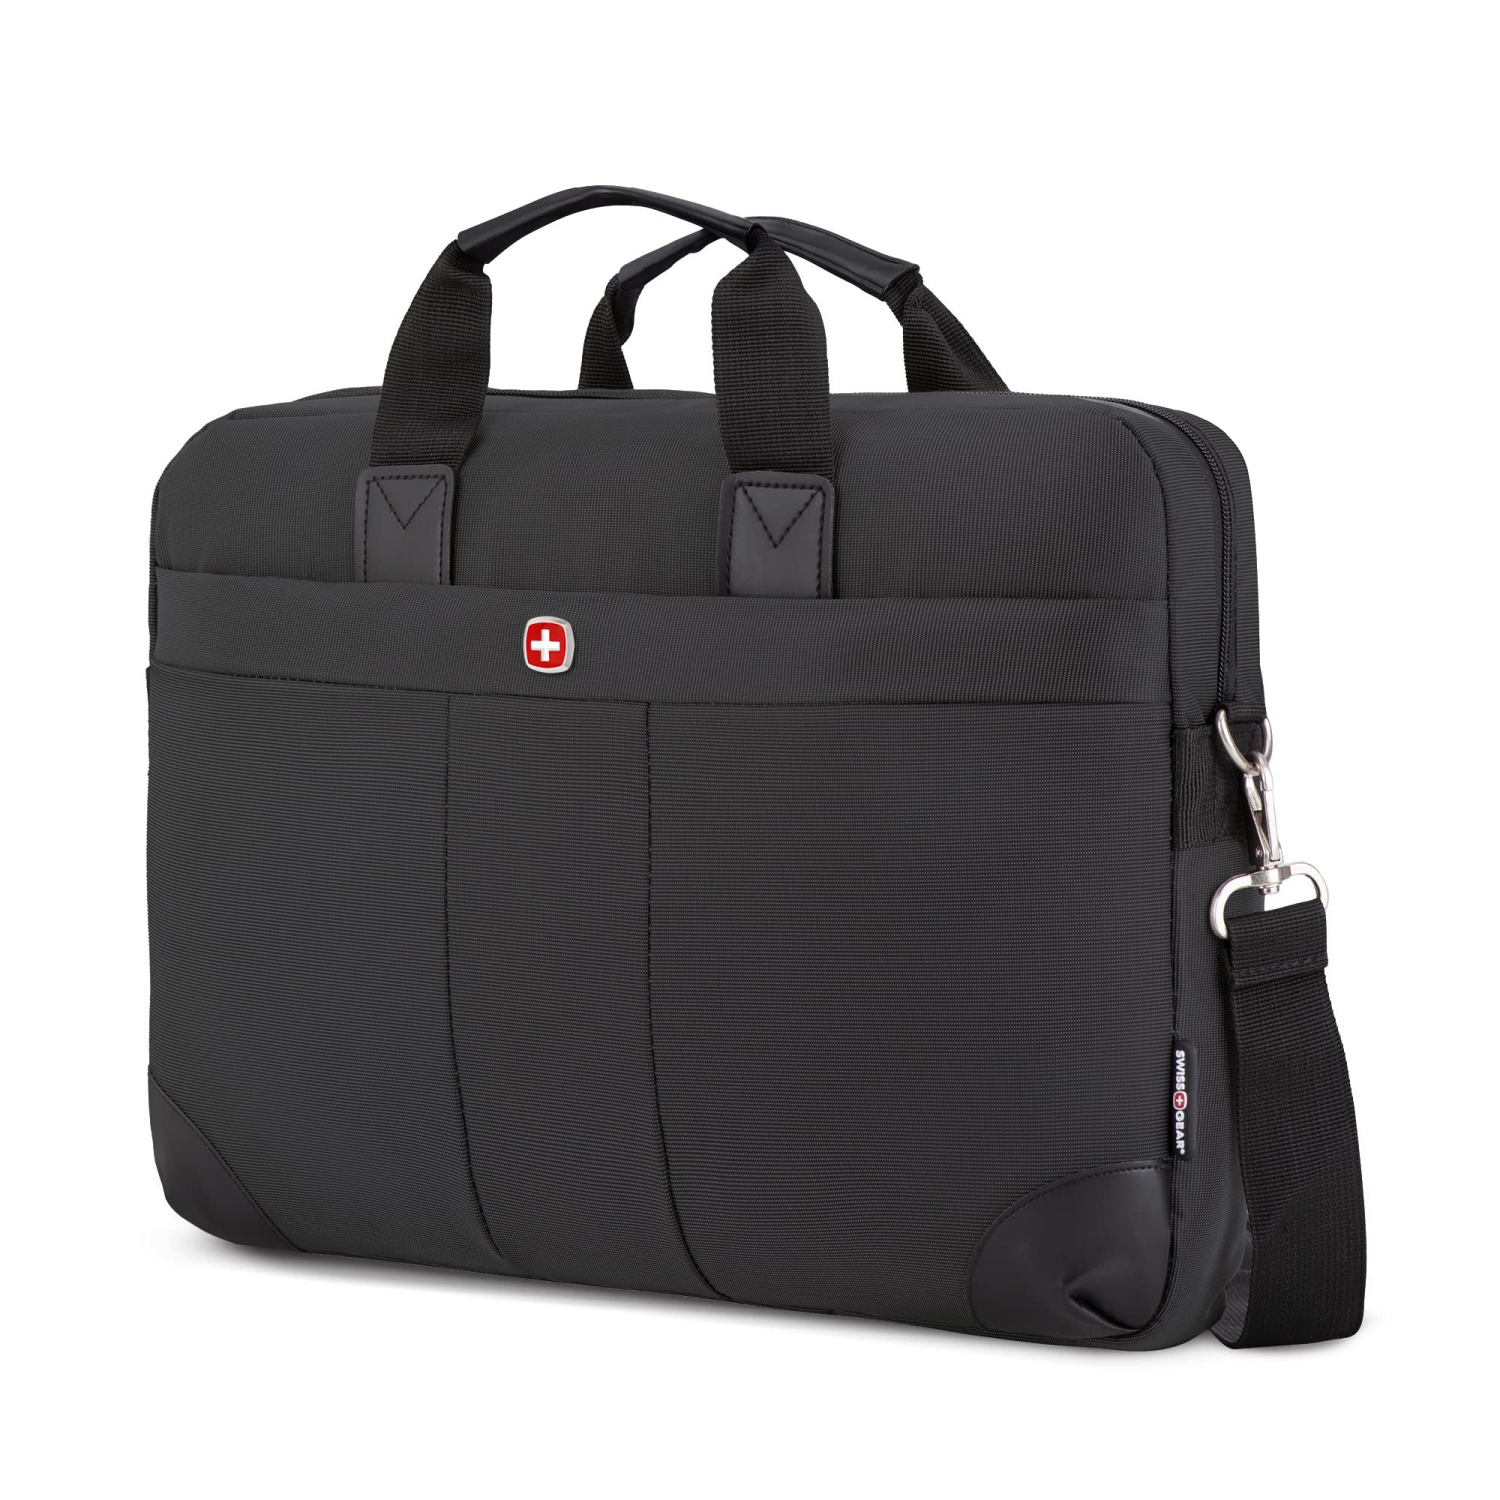 SWISSGEAR Lightweight 15.6" Laptop, Tablet and Legal-Size File Laptop Bag/Briefcase